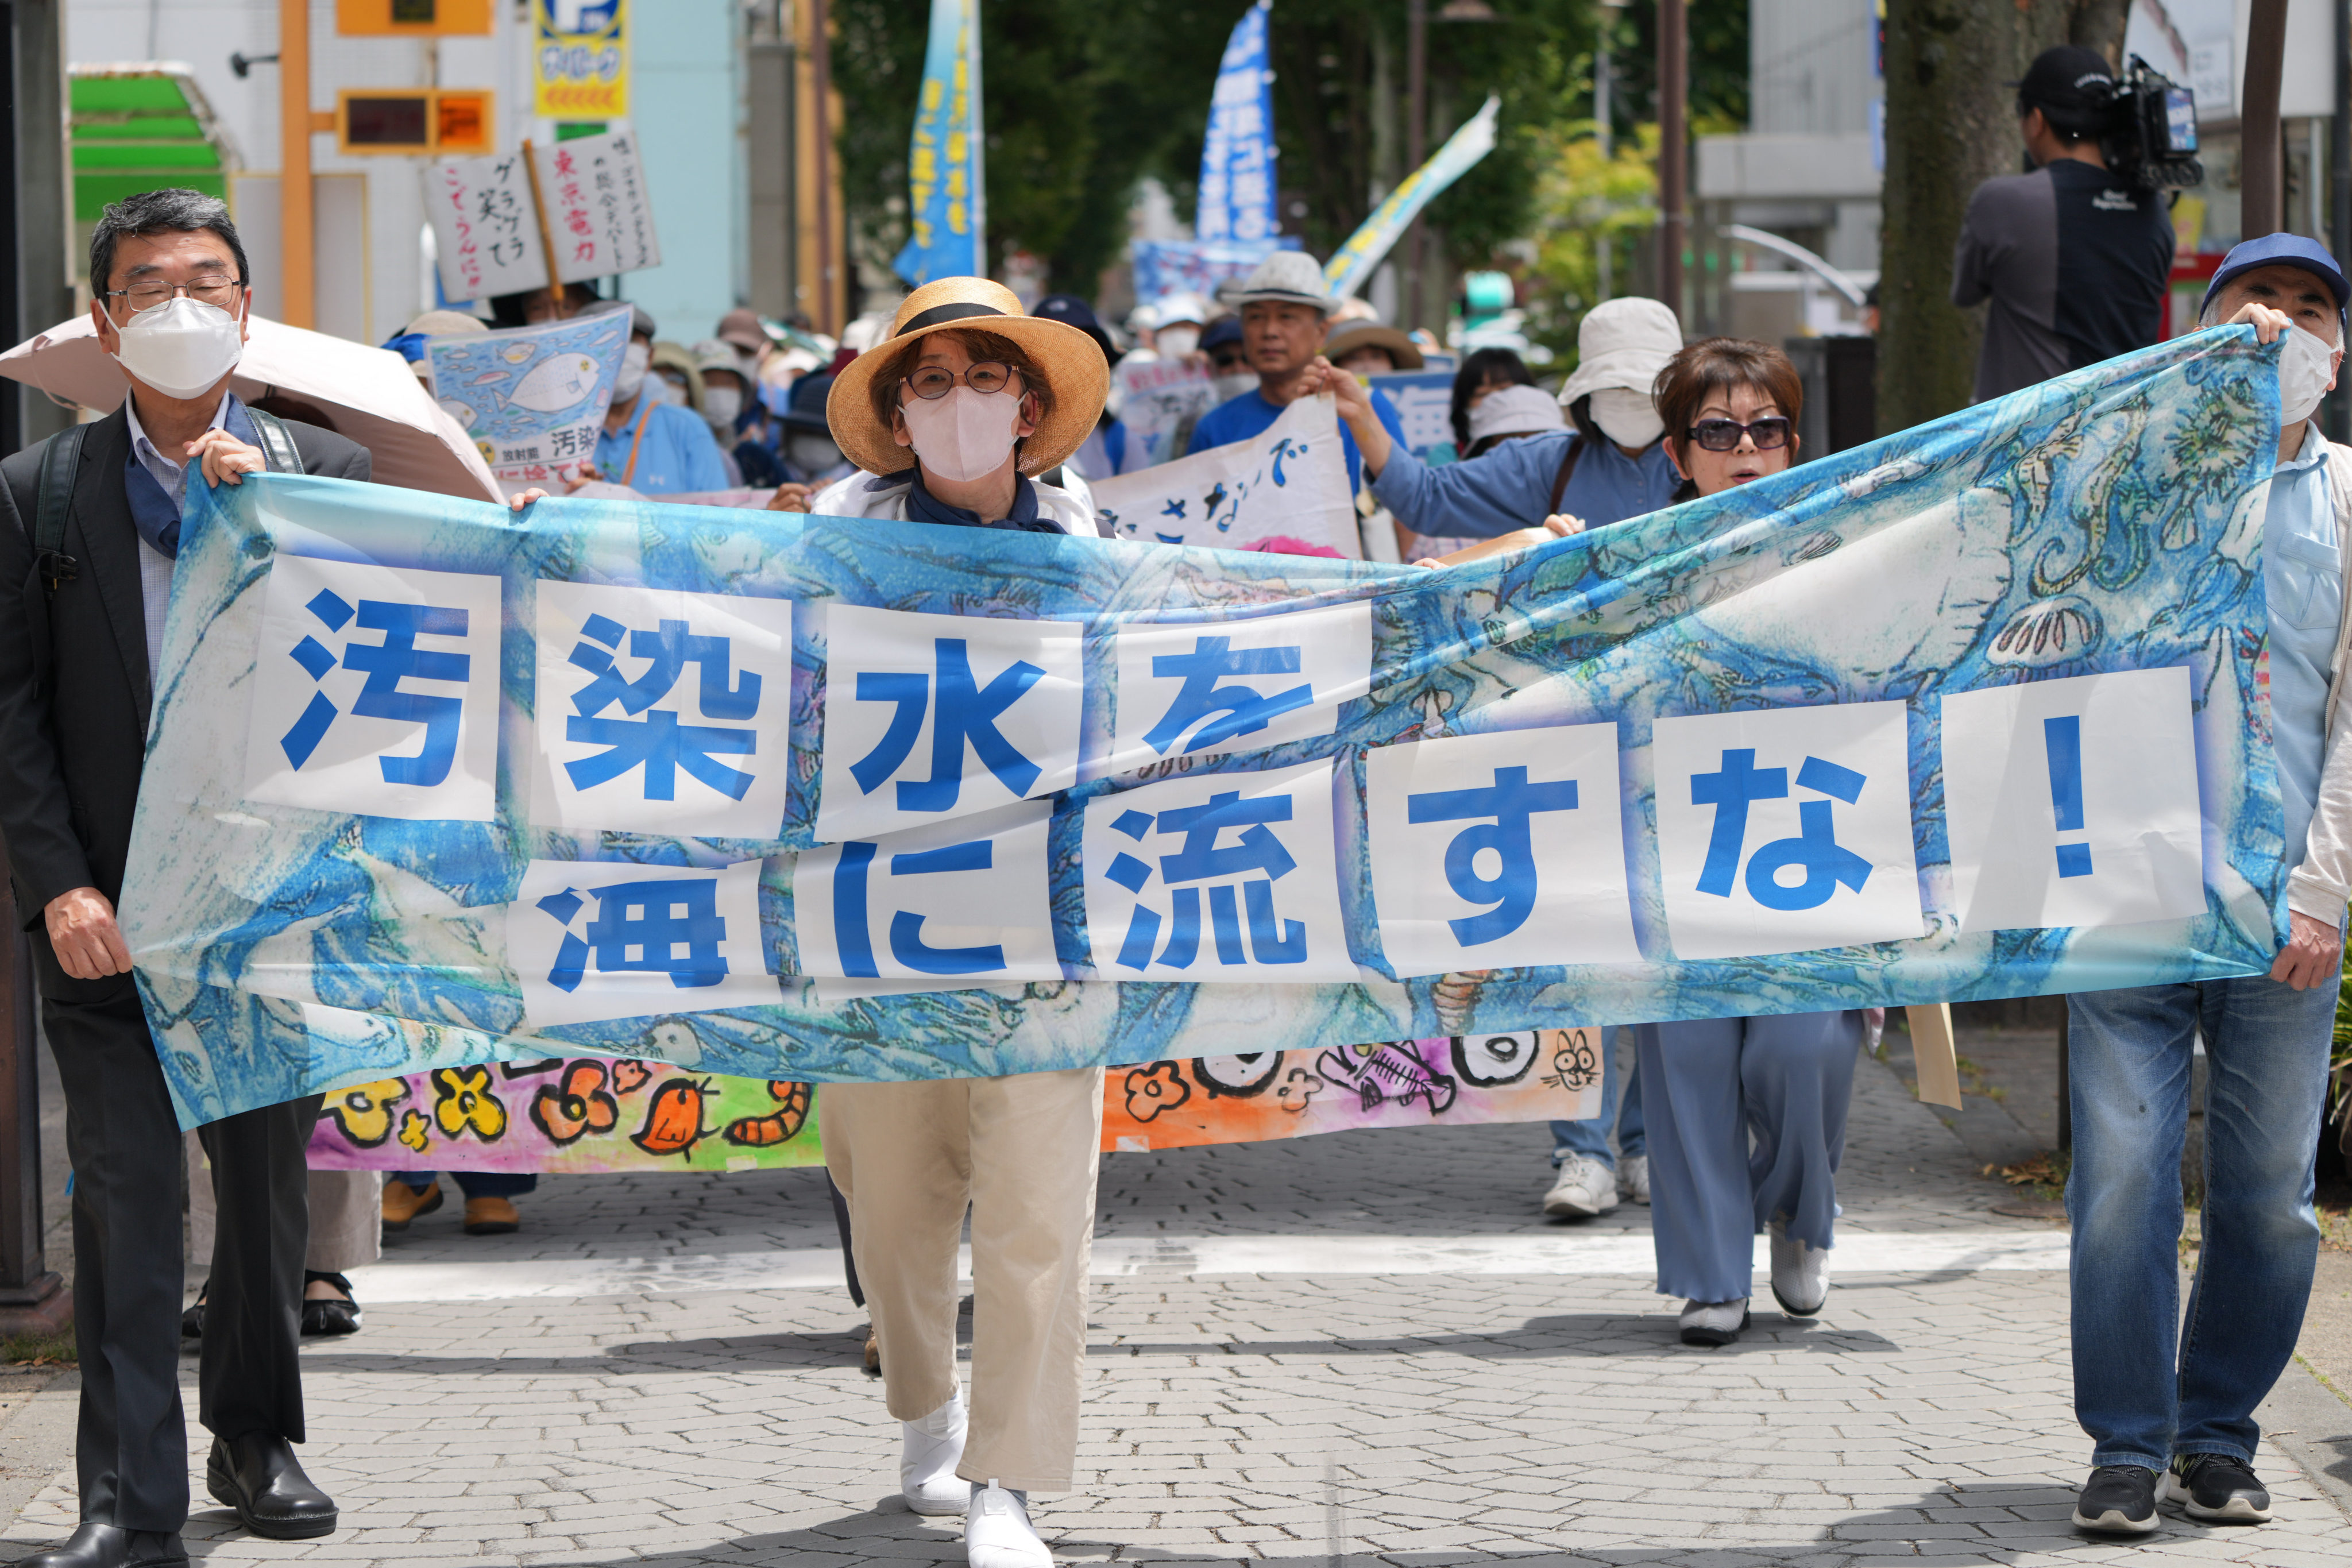 Protesters in Fukushima, Japan rally on June 20 against their government’s plan to discharge treated radioactive waste water into the sea. Photo: Xinhua